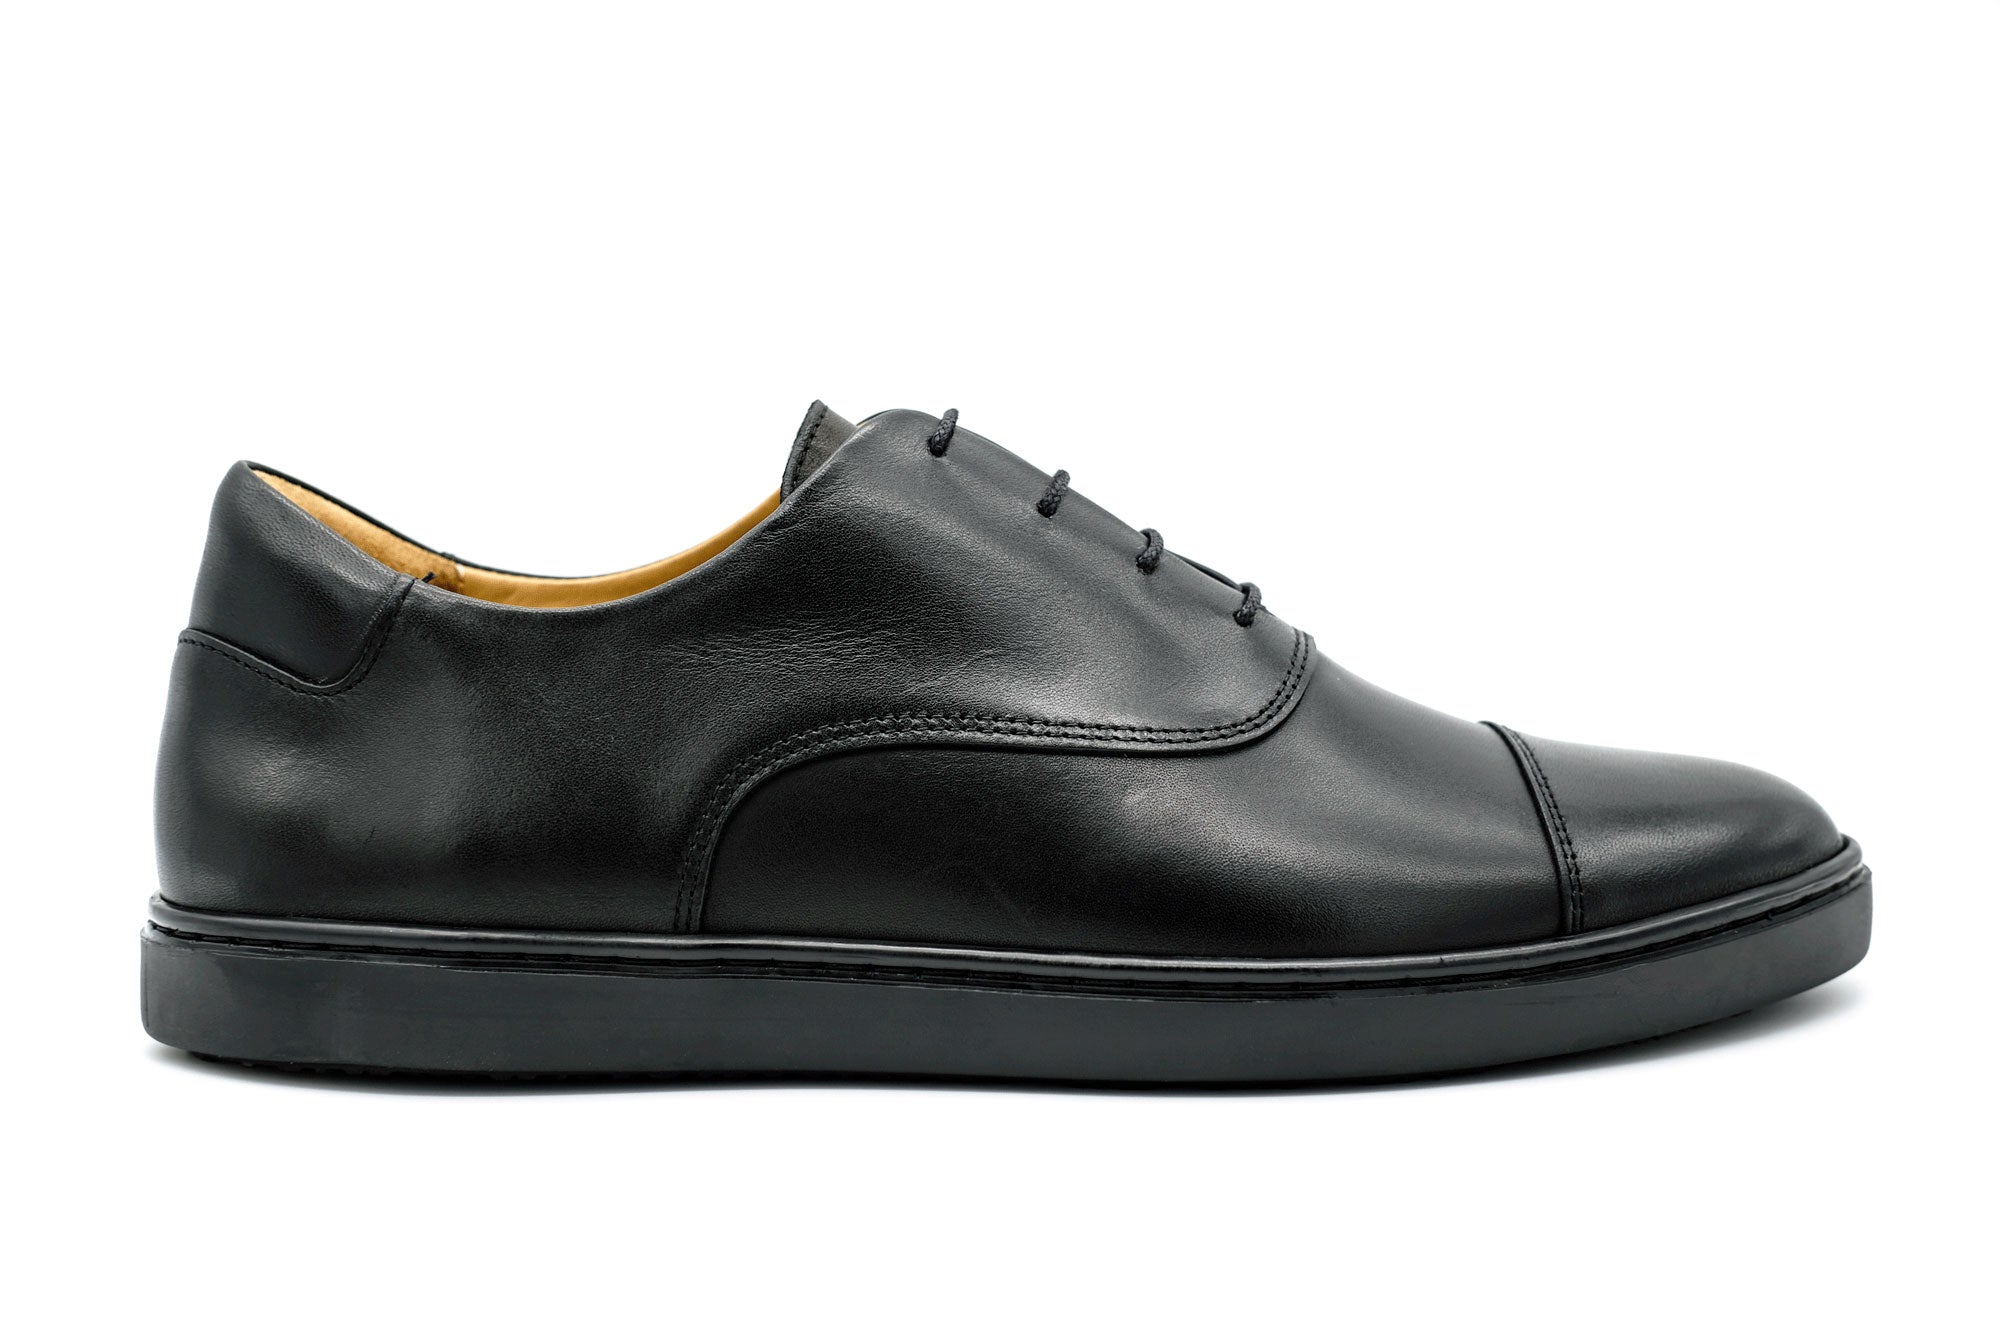 tennis shoes that look like dress shoes